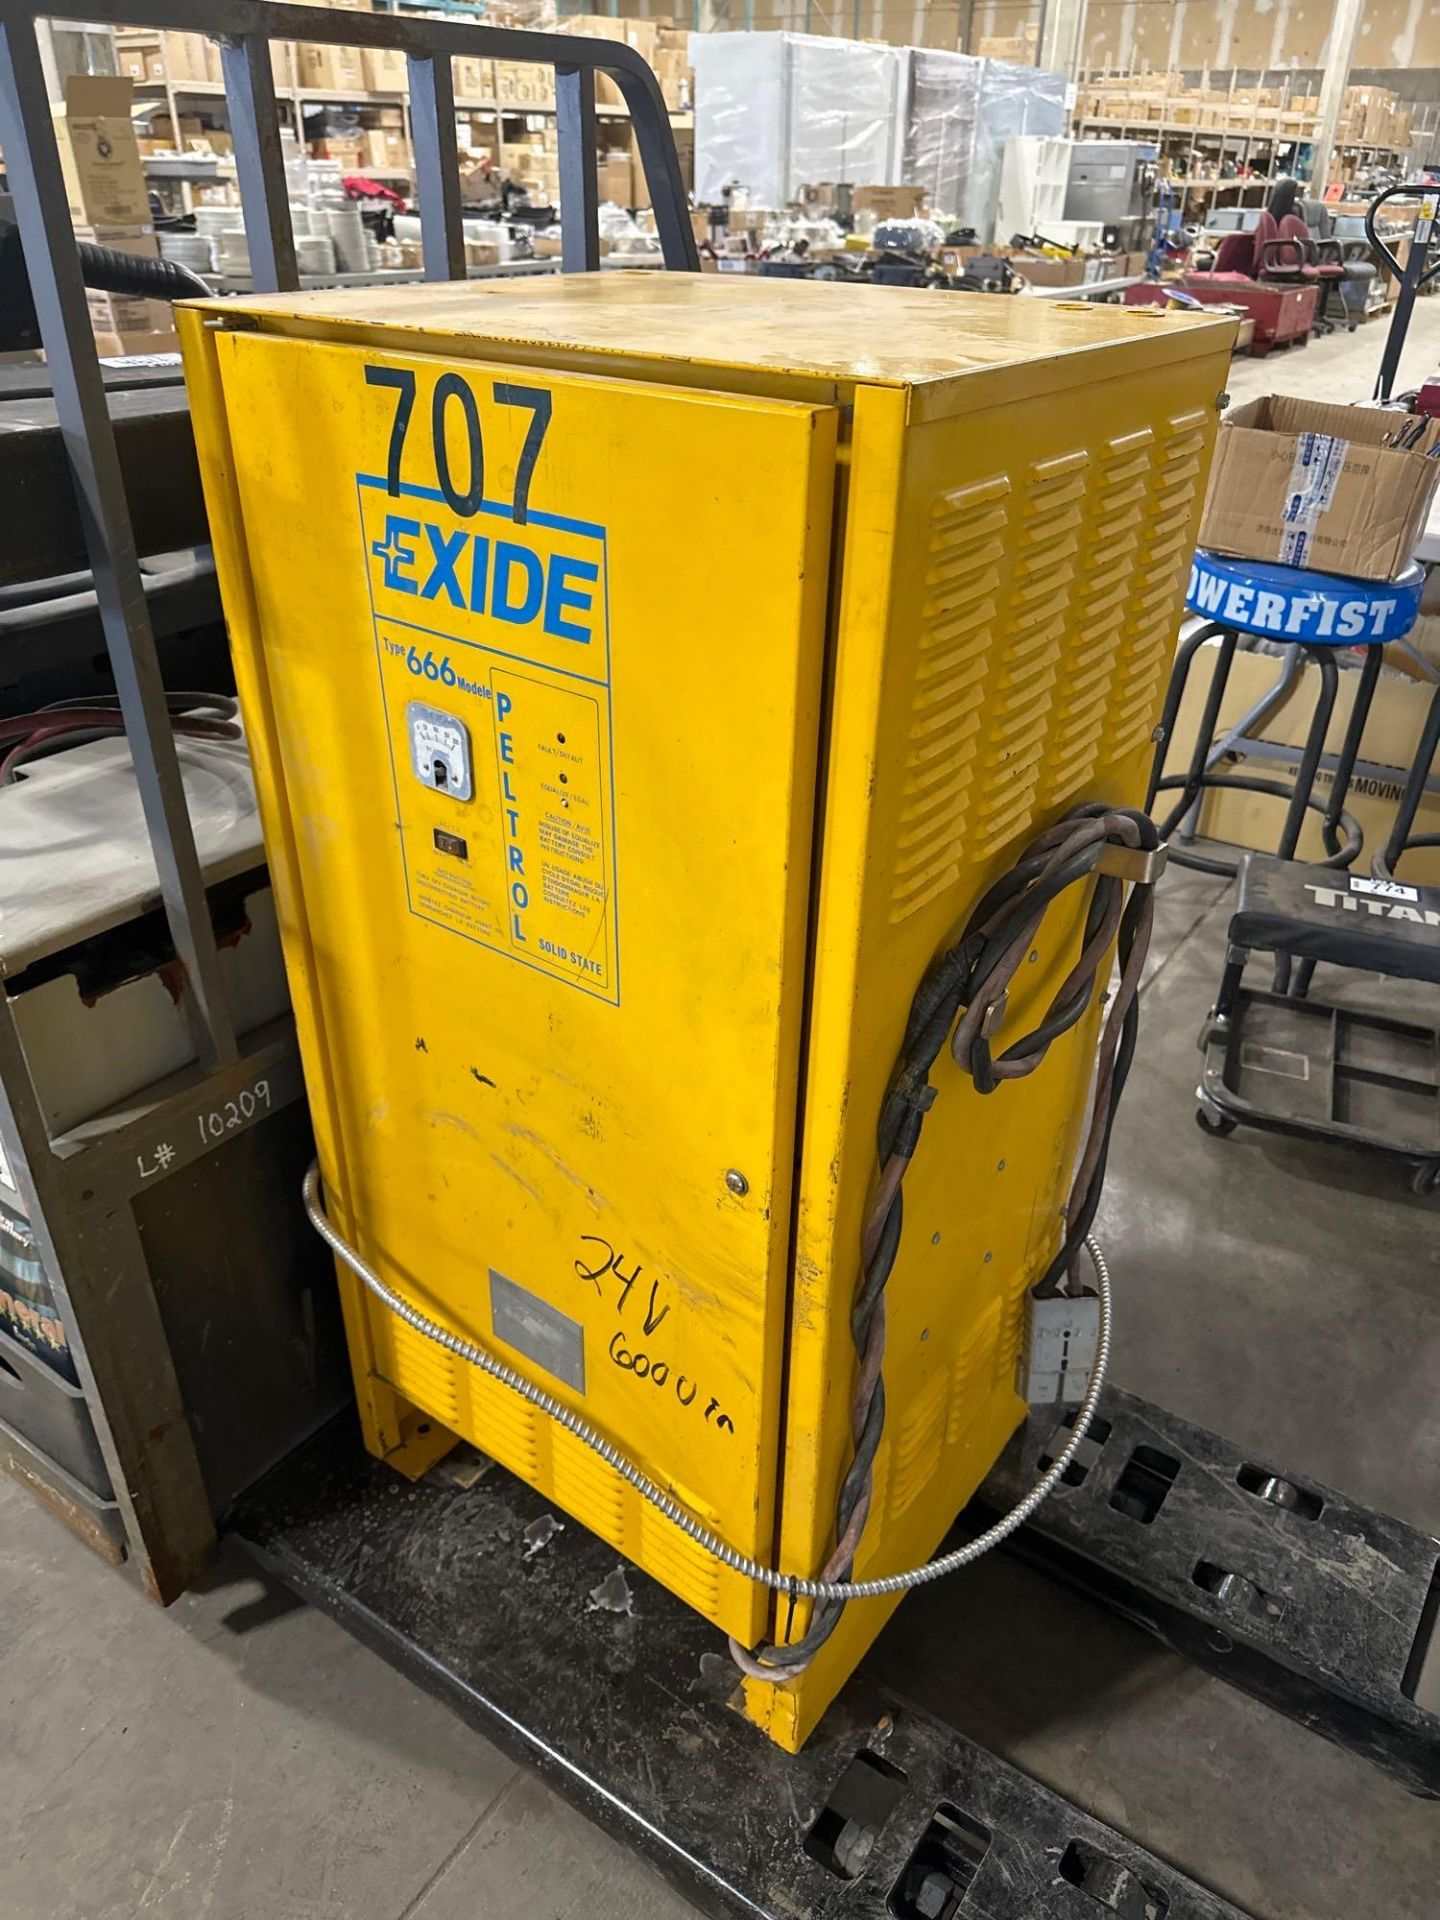 PE 4000 Series PE4000-60 Ride-On Power Jack, 2,079hrs Showing w/ Exide 666 24V Battery Charger - Image 6 of 8